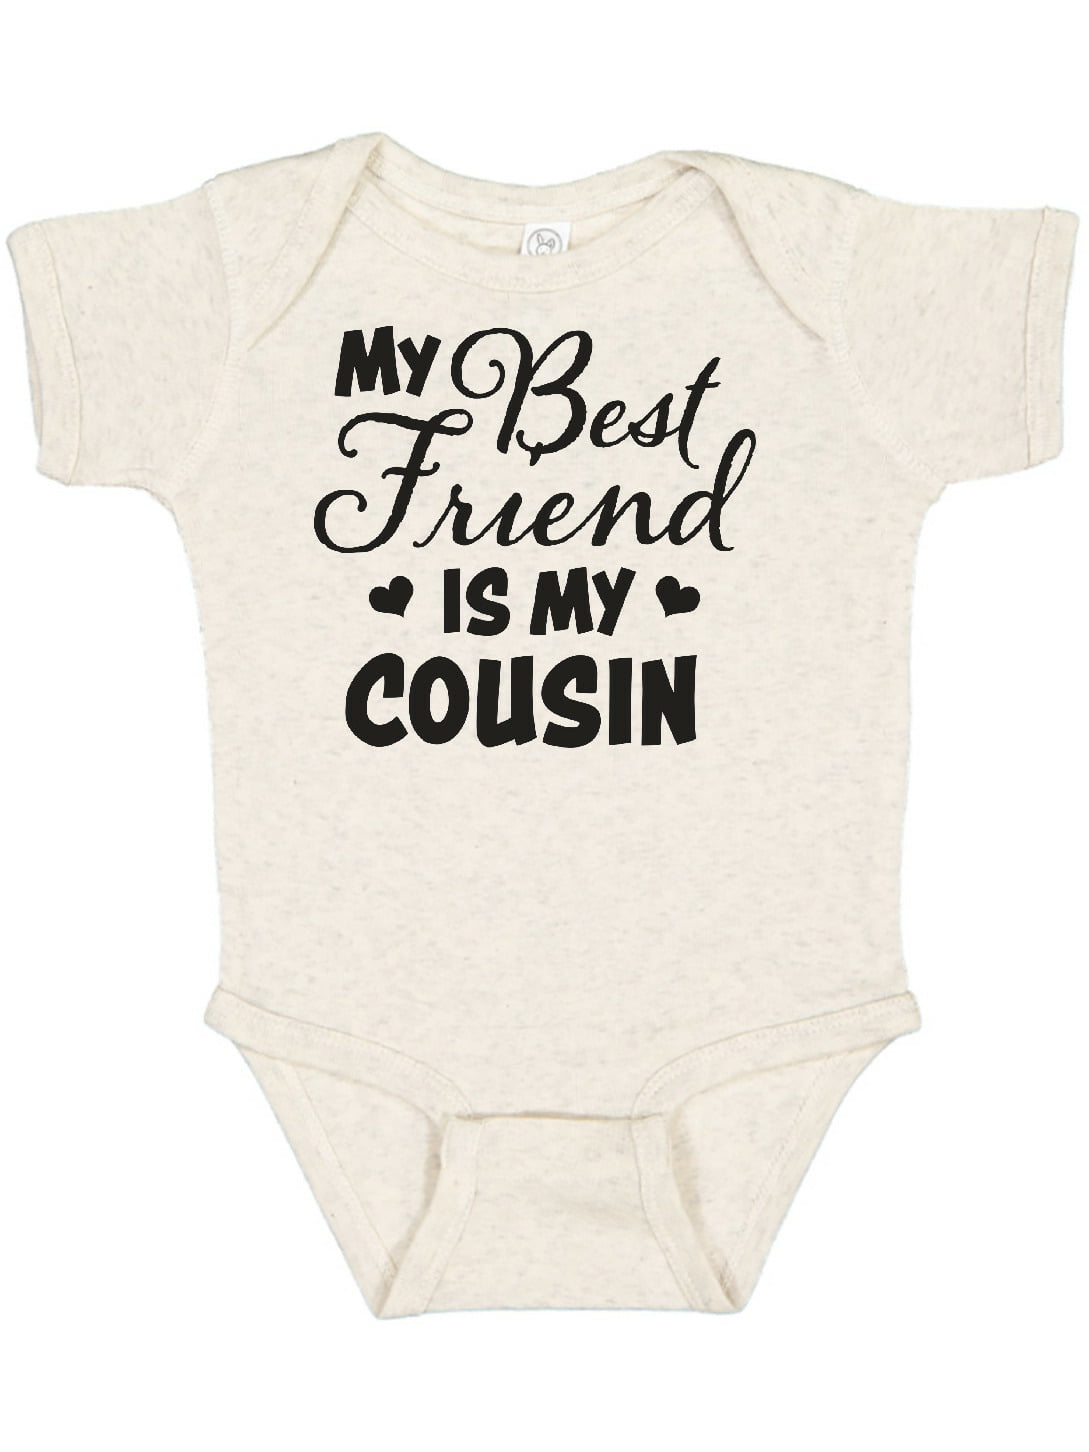 Infant Jumpsuit Newborn Baby Bodysuit iDzn New to The Cousin Crew & My Big Sister Has Paws Funny Slogan Romper Pack of 2 Baby Unisex Novelty Outfit 